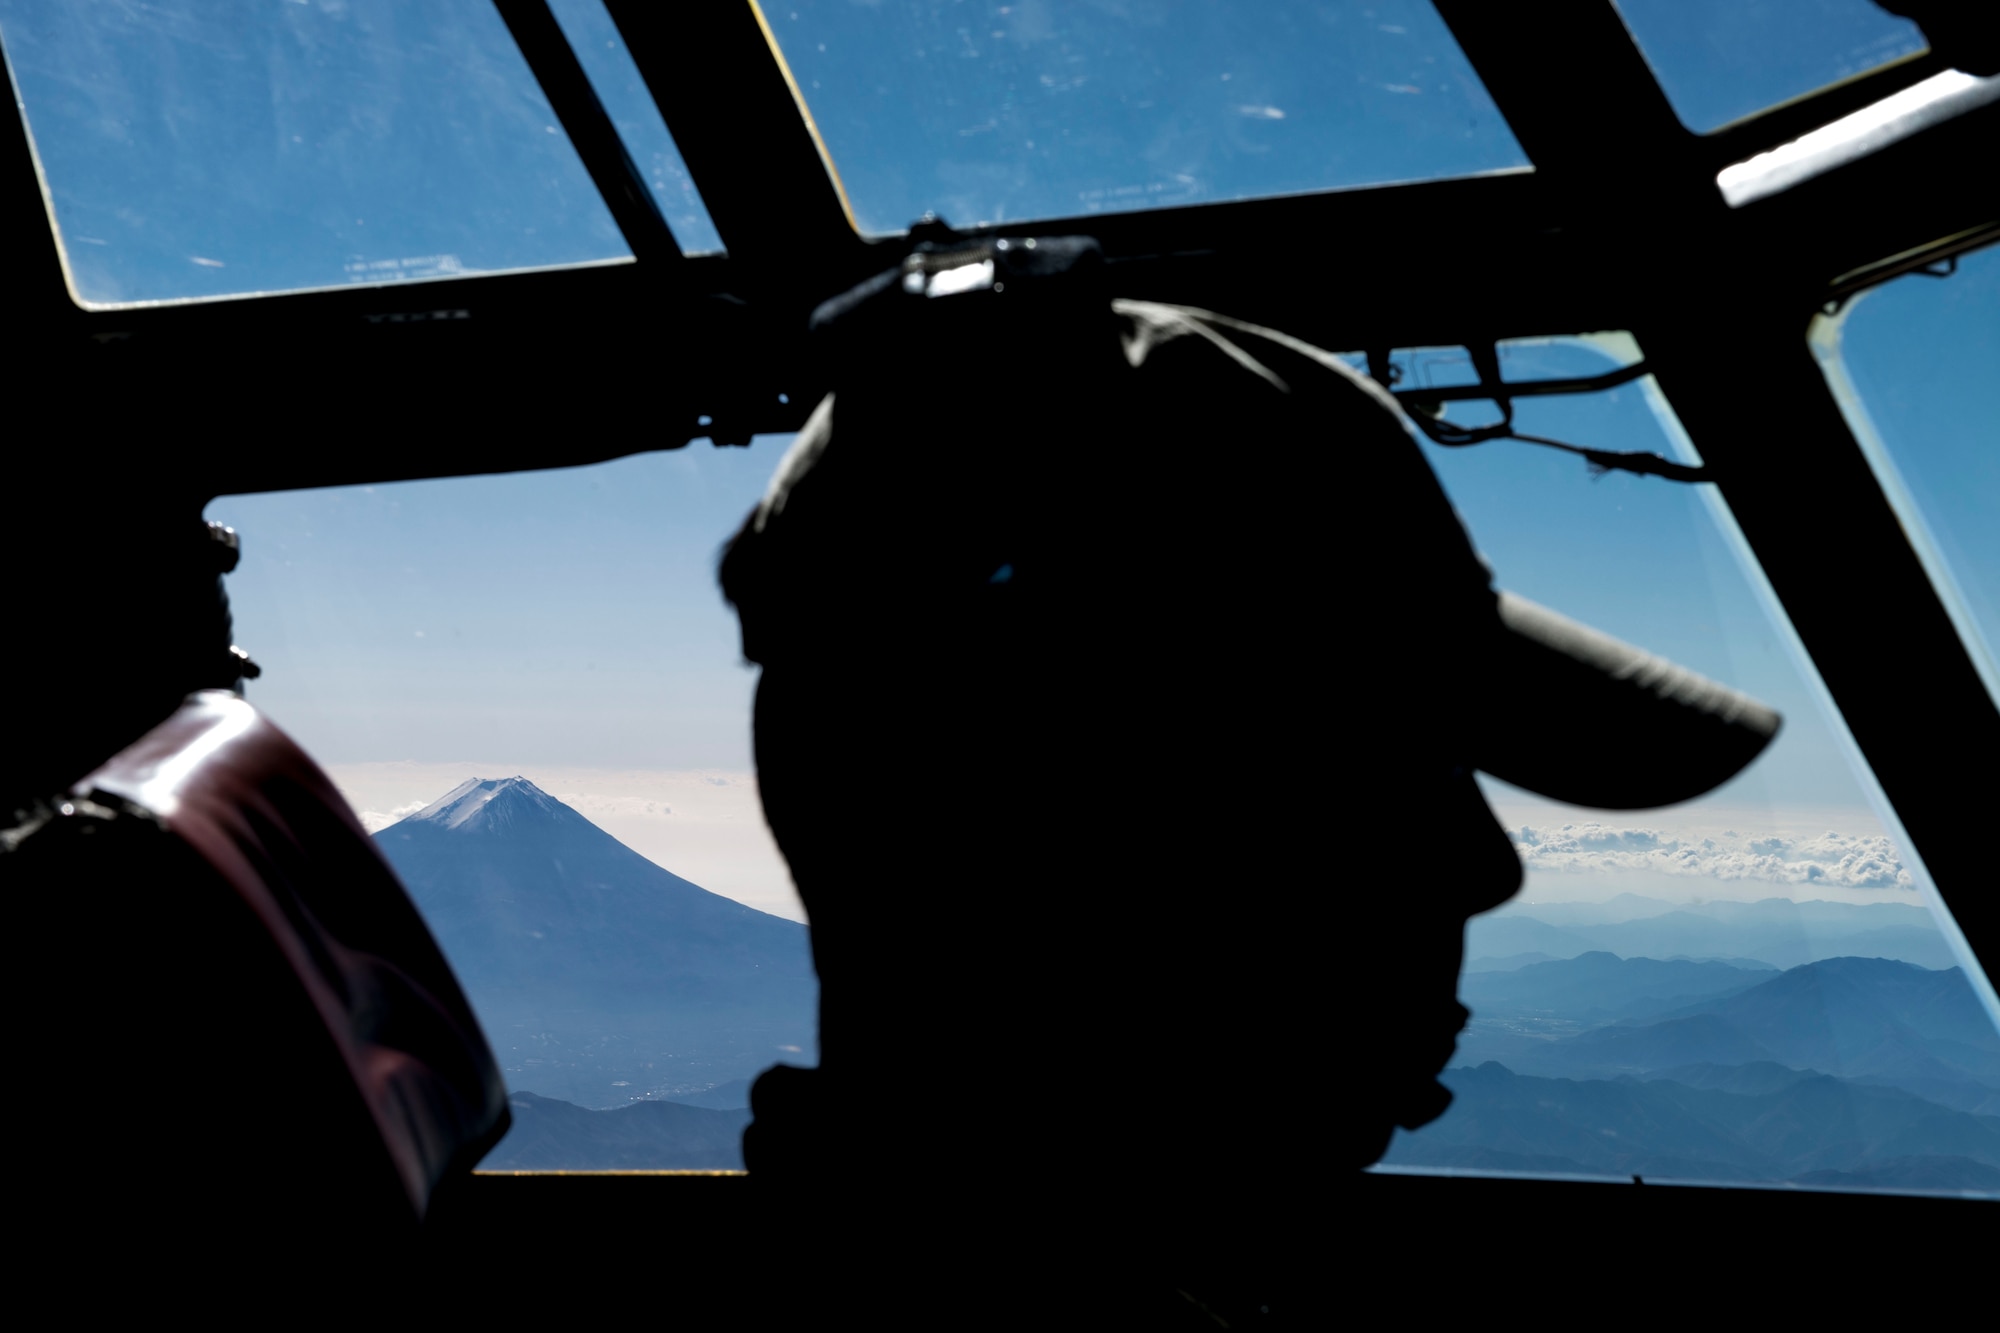 Mt. Fuji, a World Heritage Site, is seen Nov. 19, 2014, from a C-130 Hercules flying from Yokota Air Base, Japan, to South Korea to take part in Exercise Max Thunder. The 36th Airlift Squadron plays a vital mobility role in the biannual exercise aimed at improving the interoperability of the U.S.-South Korea partnership. (U.S. Air Force photo/Staff Sgt. Cody H. Ramirez)